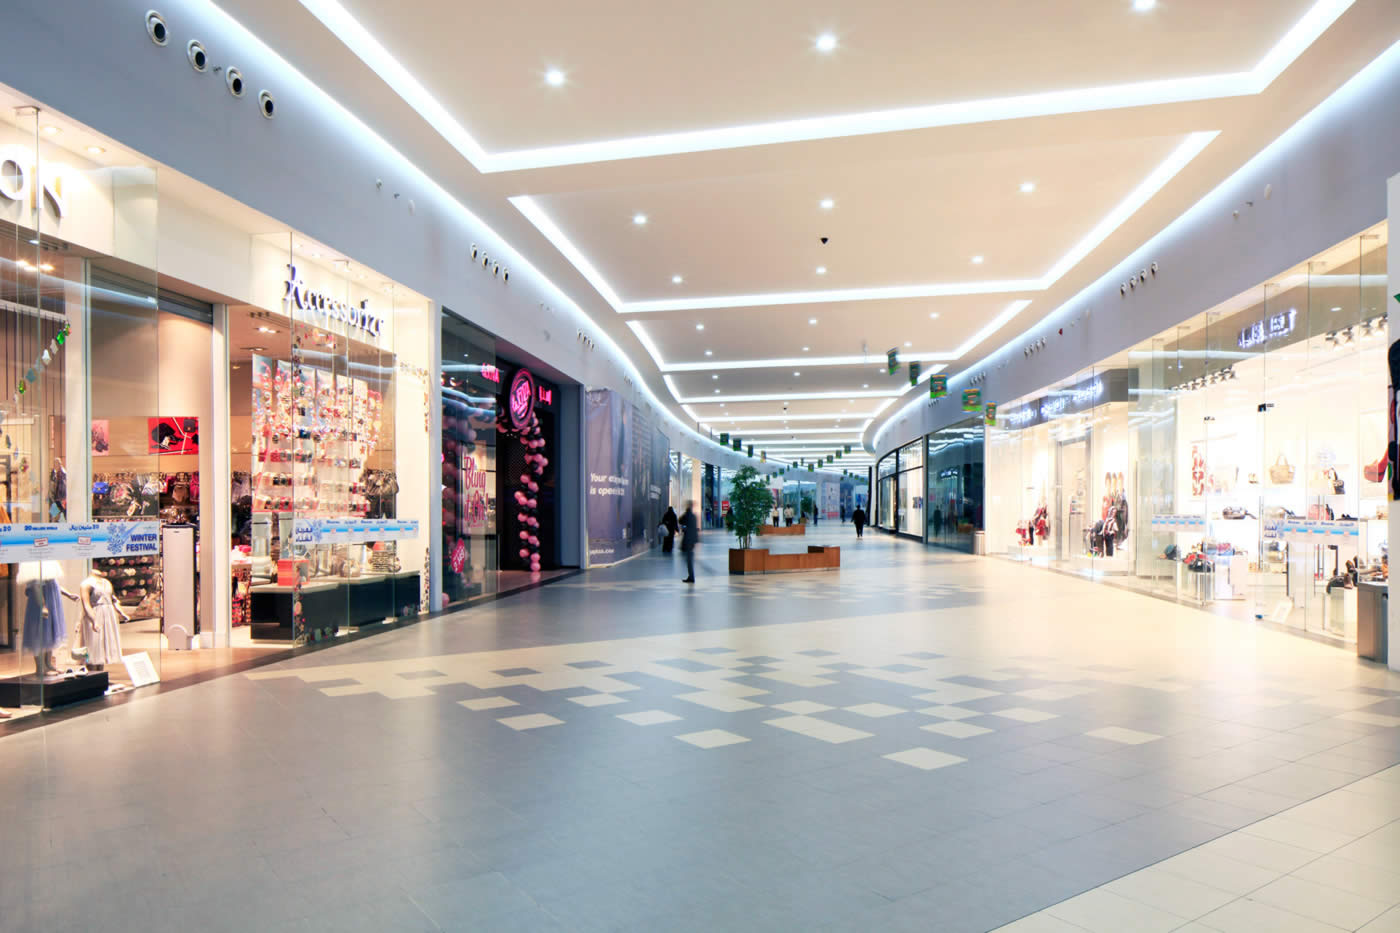 Someone Just Bought An Entire Shopping Mall For $100